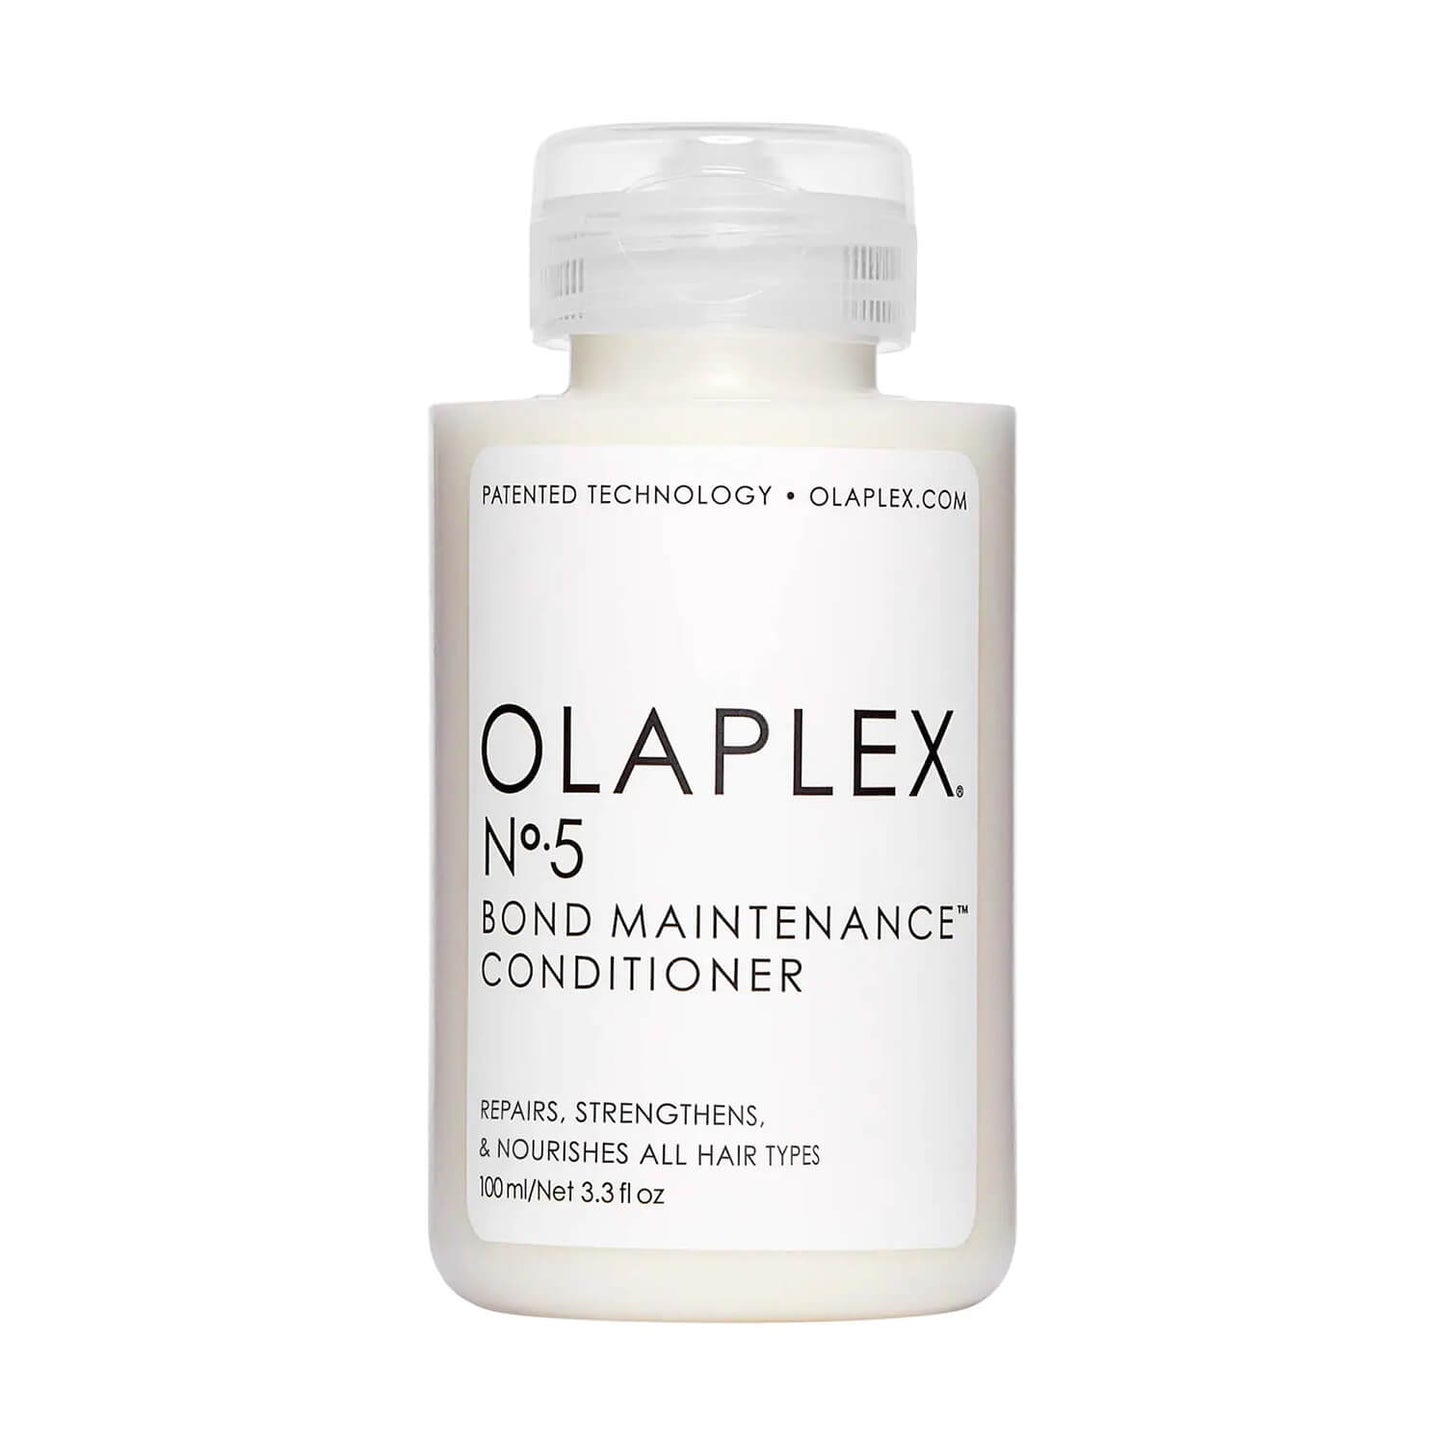 shop olaplex no 5 conditioner available at heygirl.pk for delivery in Pakistan